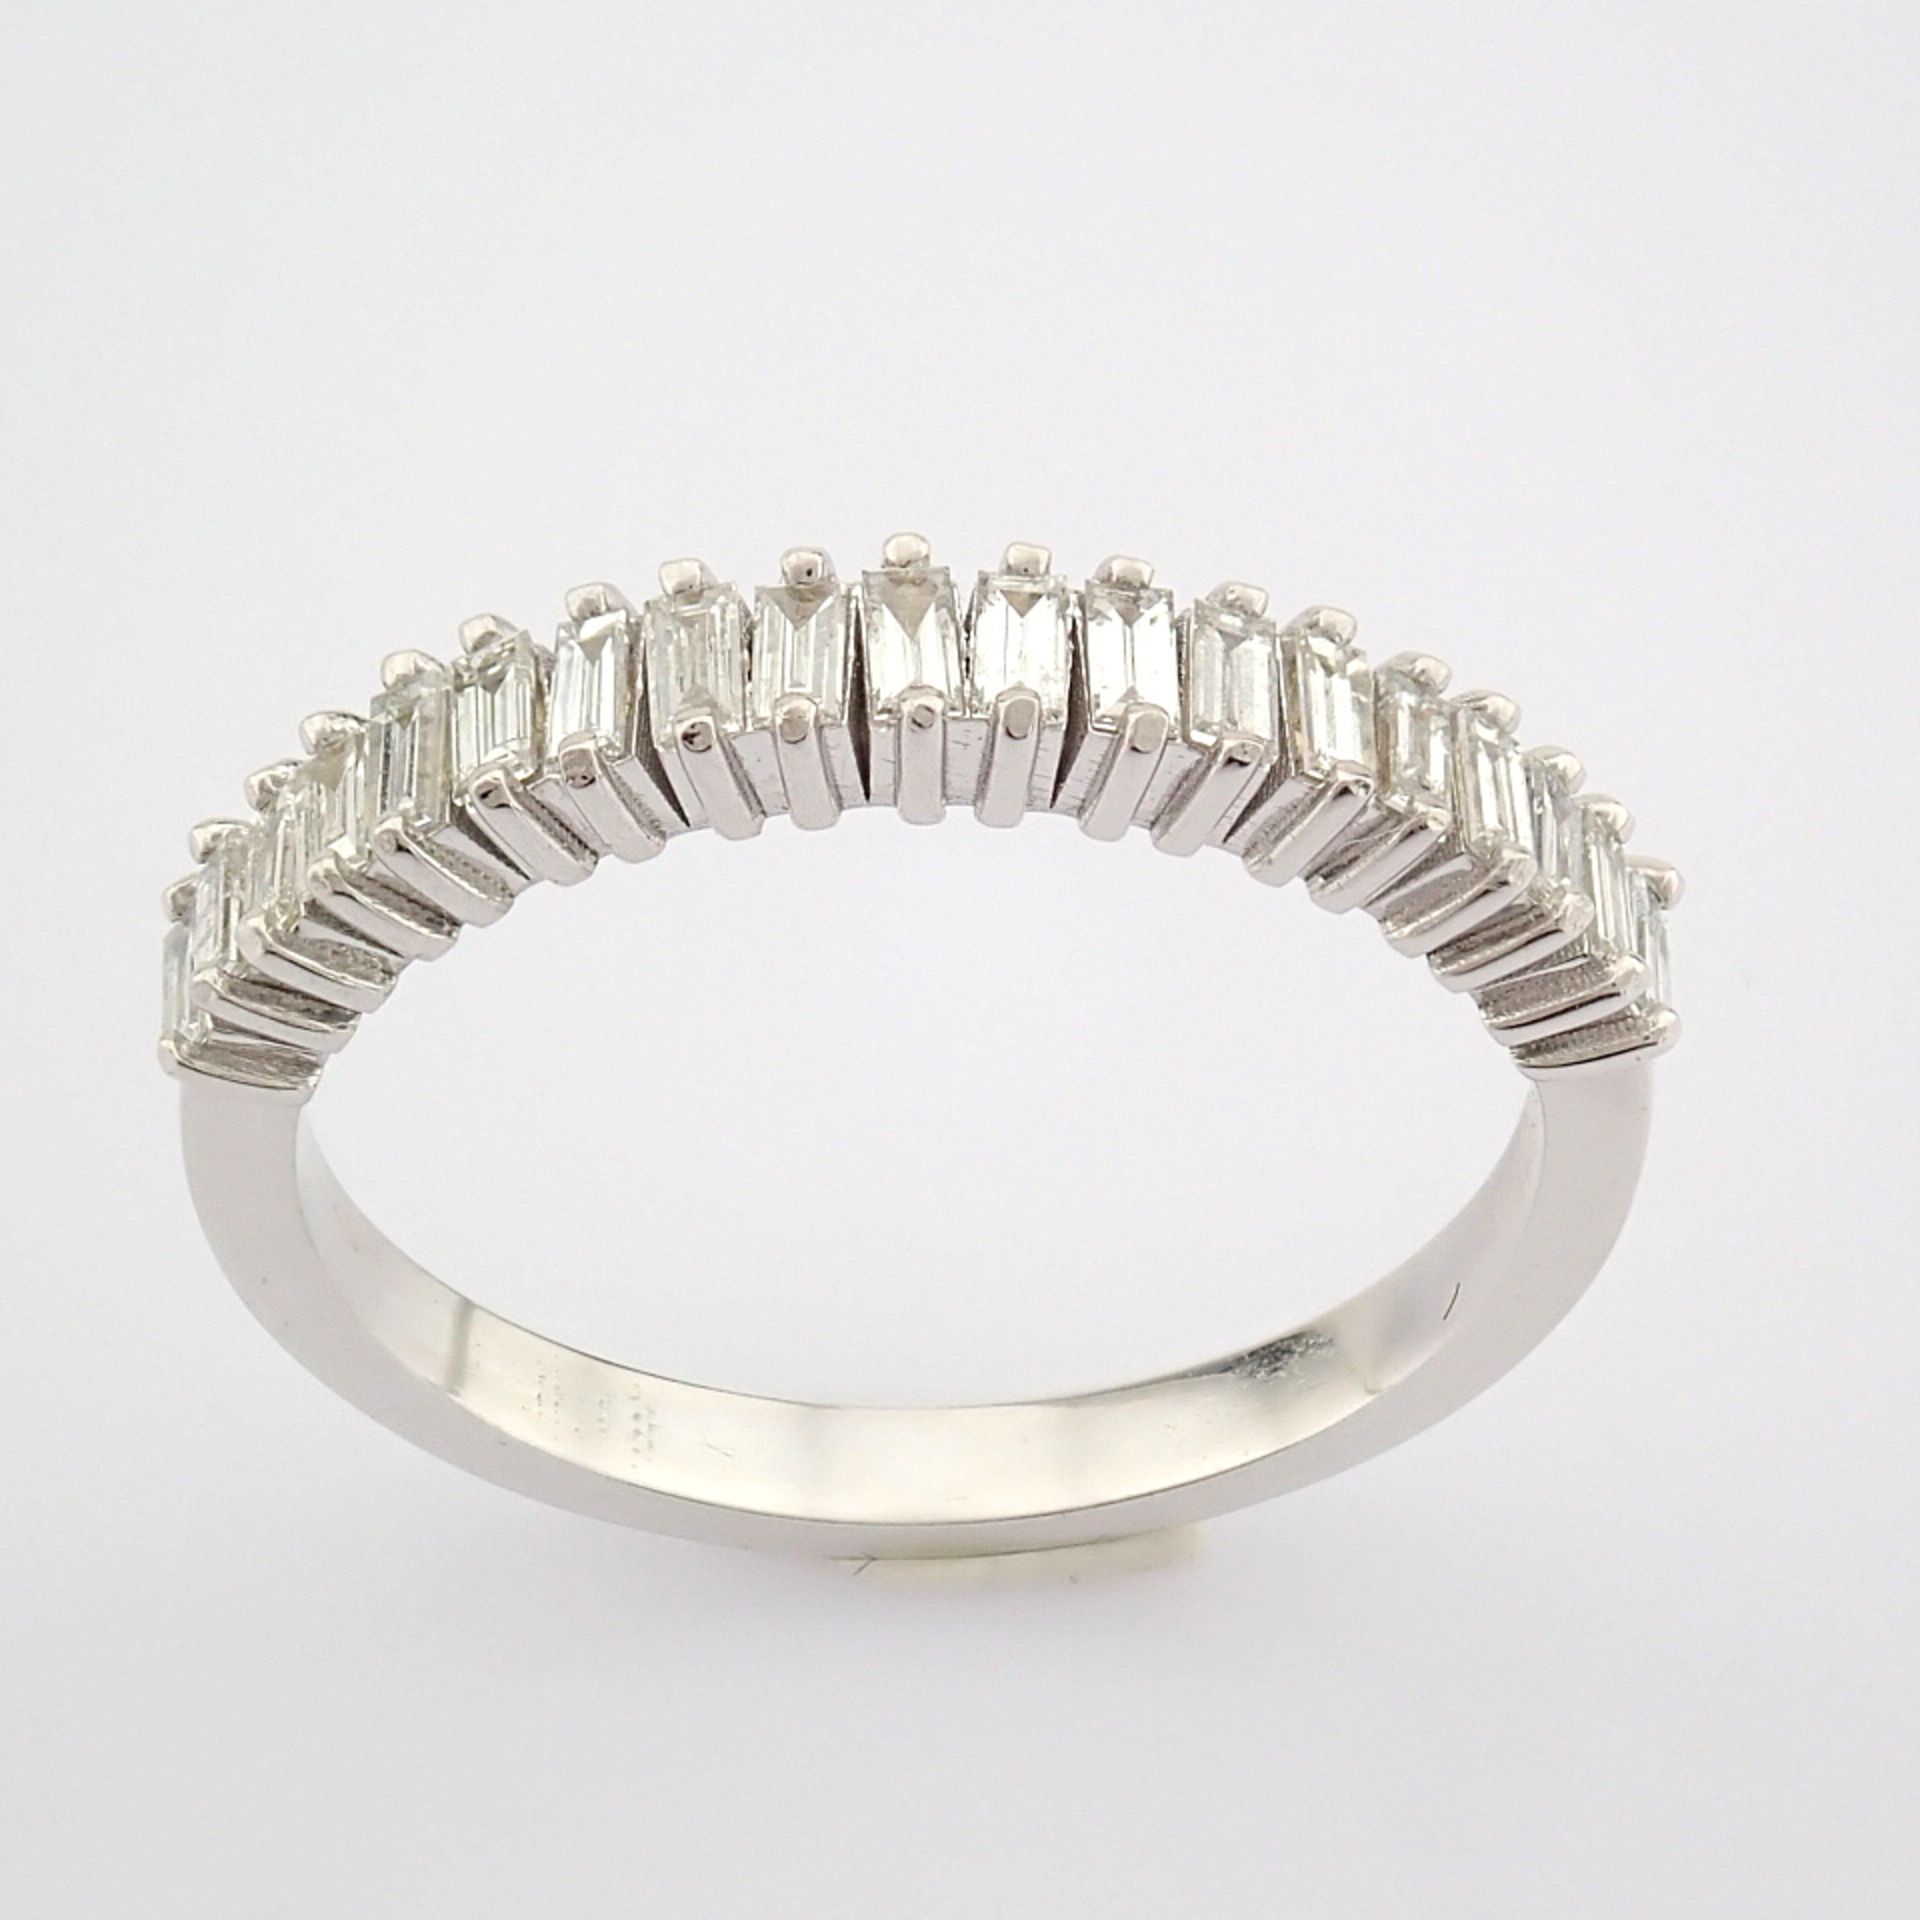 Certificated 14K White Gold Baguette Diamond Ring (Total 0.43 ct Stone) - Image 2 of 8